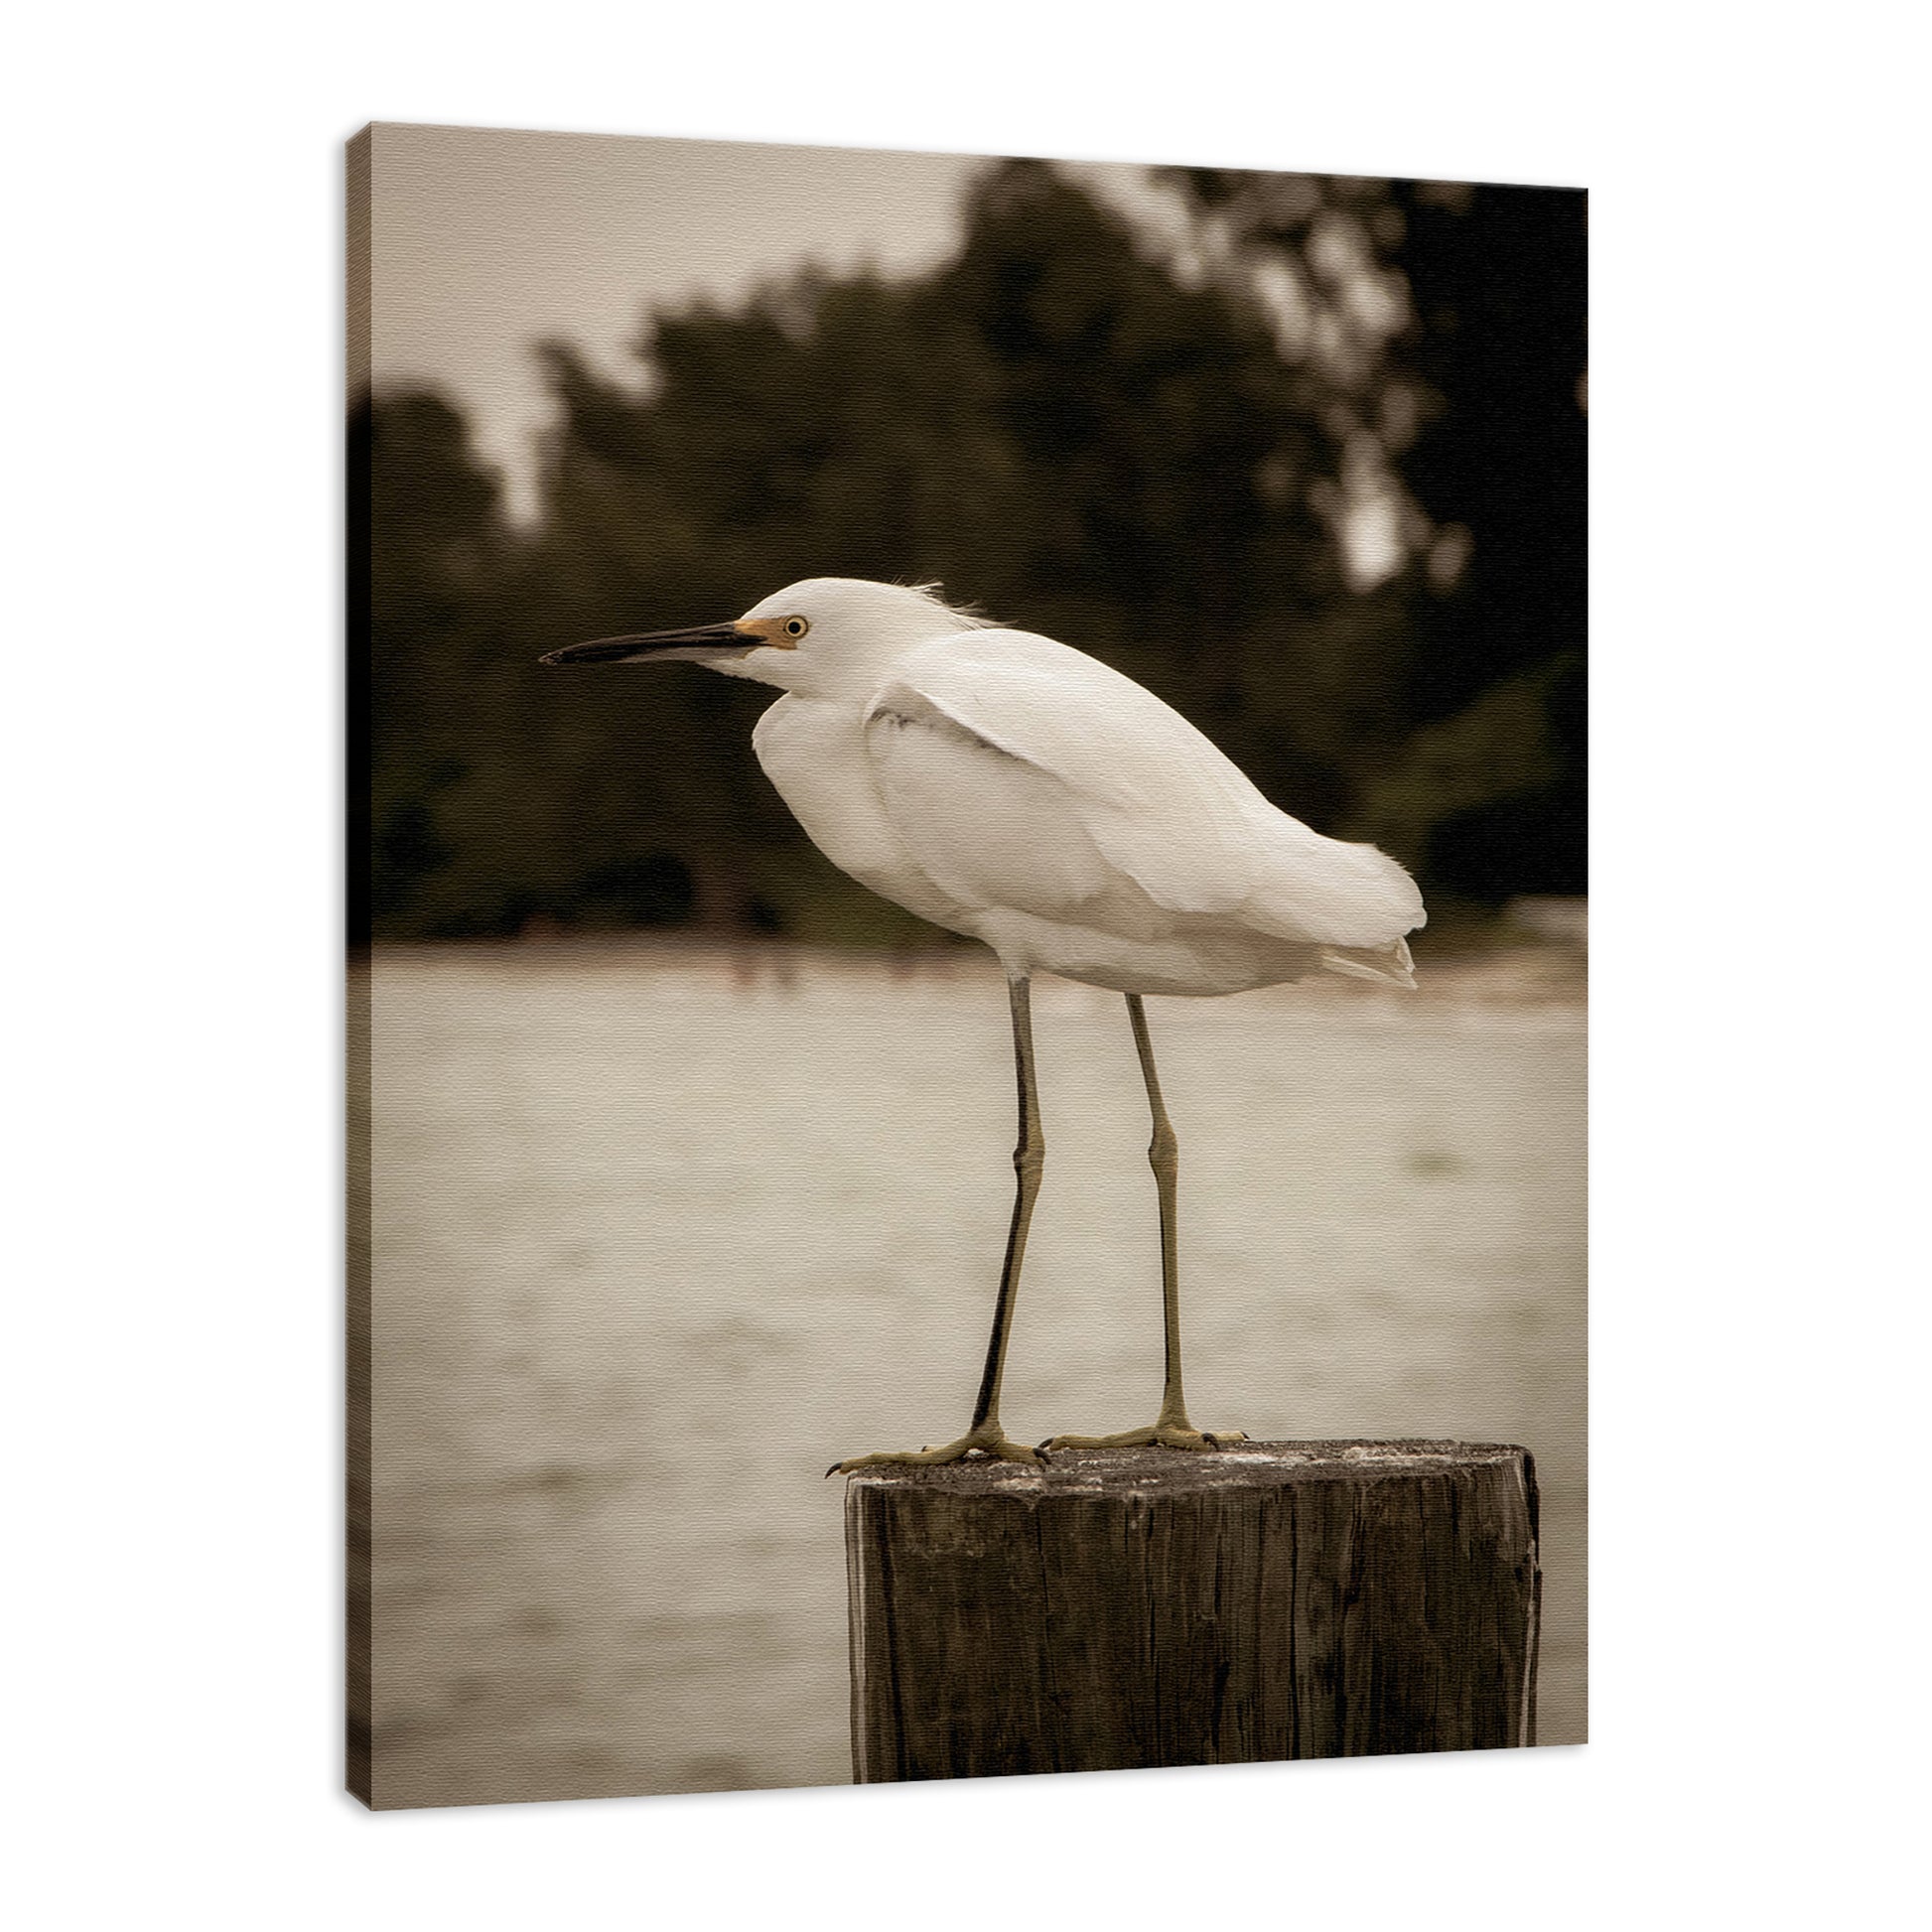 Art For Large Dining Room Wall: Aged Colorized Snowy Egret on Pillar Wildlife Photo Fine Art Canvas & Unframed Wall Art Prints  - PIPAFINEART